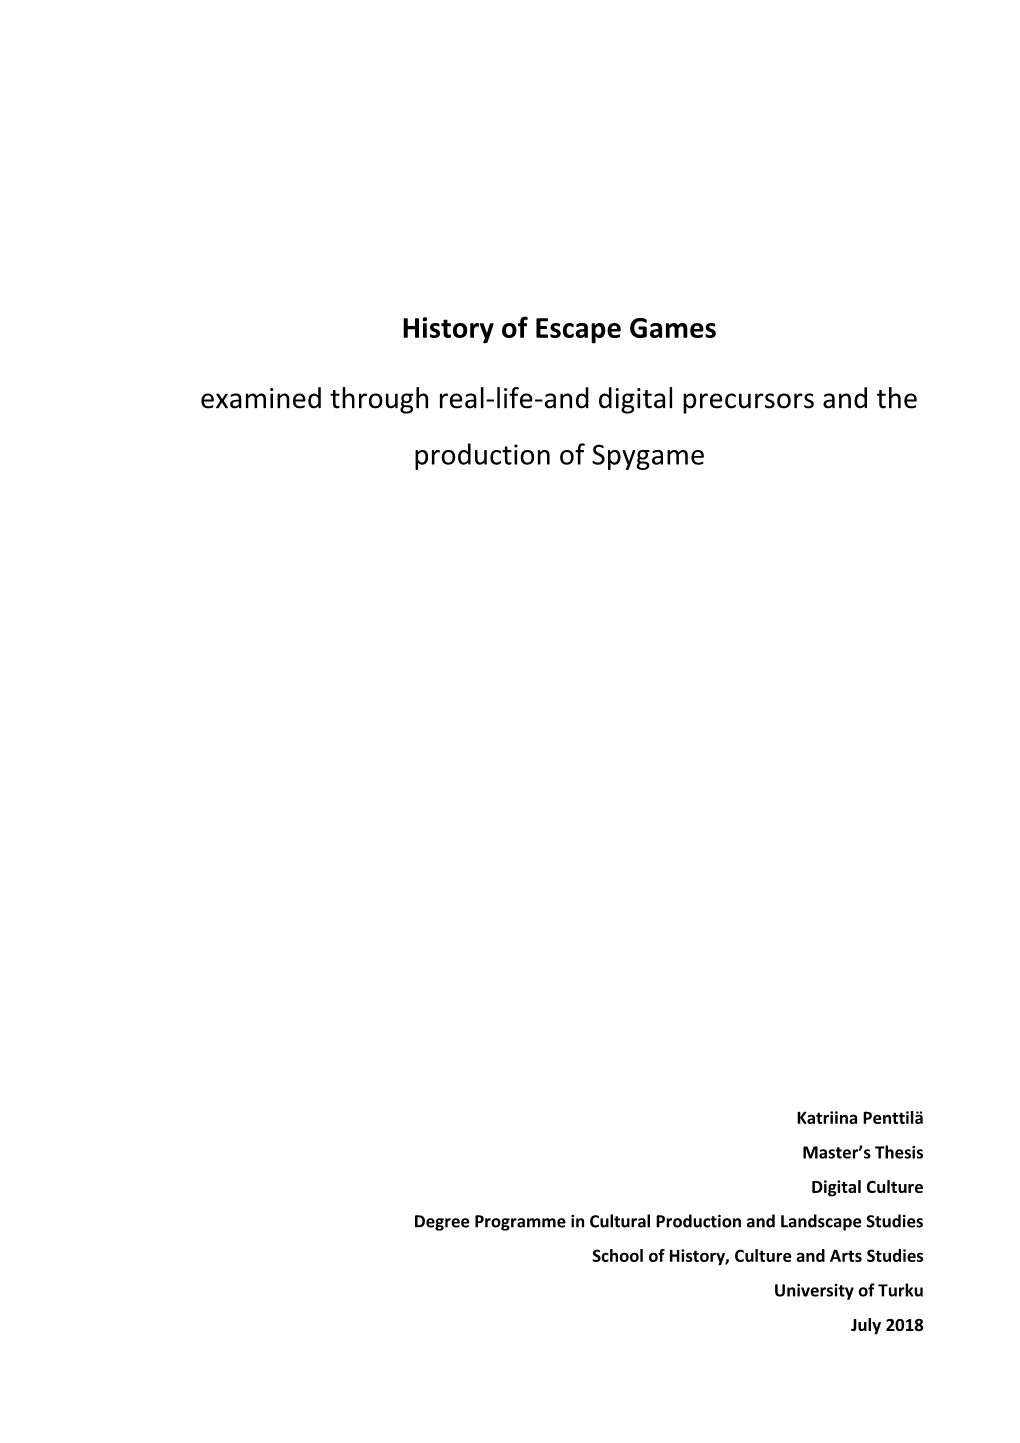 History of Escape Games Examined Through Real-Life-And Digital Precursors and The